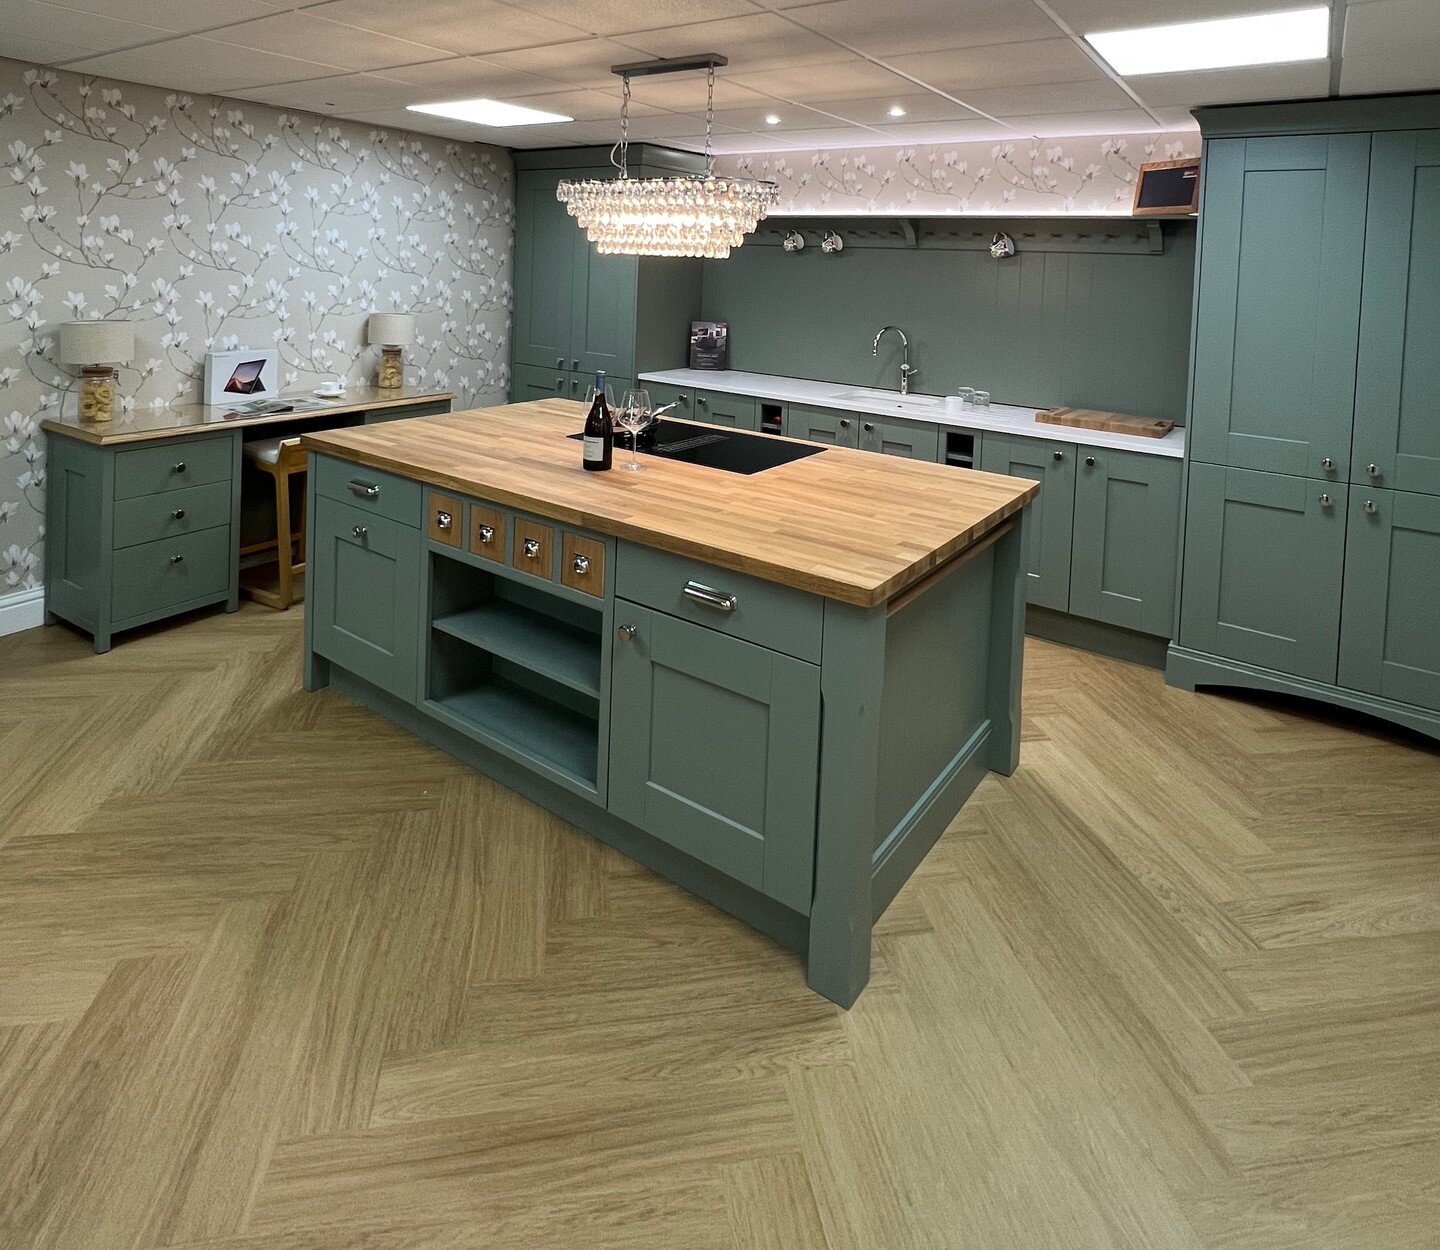 If you want an elegant and timeless look for your new kitchen, the Laura Ashley Kitchen Collection is perfect for you. Get in touch to come and see our newly refurbished kitchen showroom!

We have a huge range of beautifully designed and crafted @lau